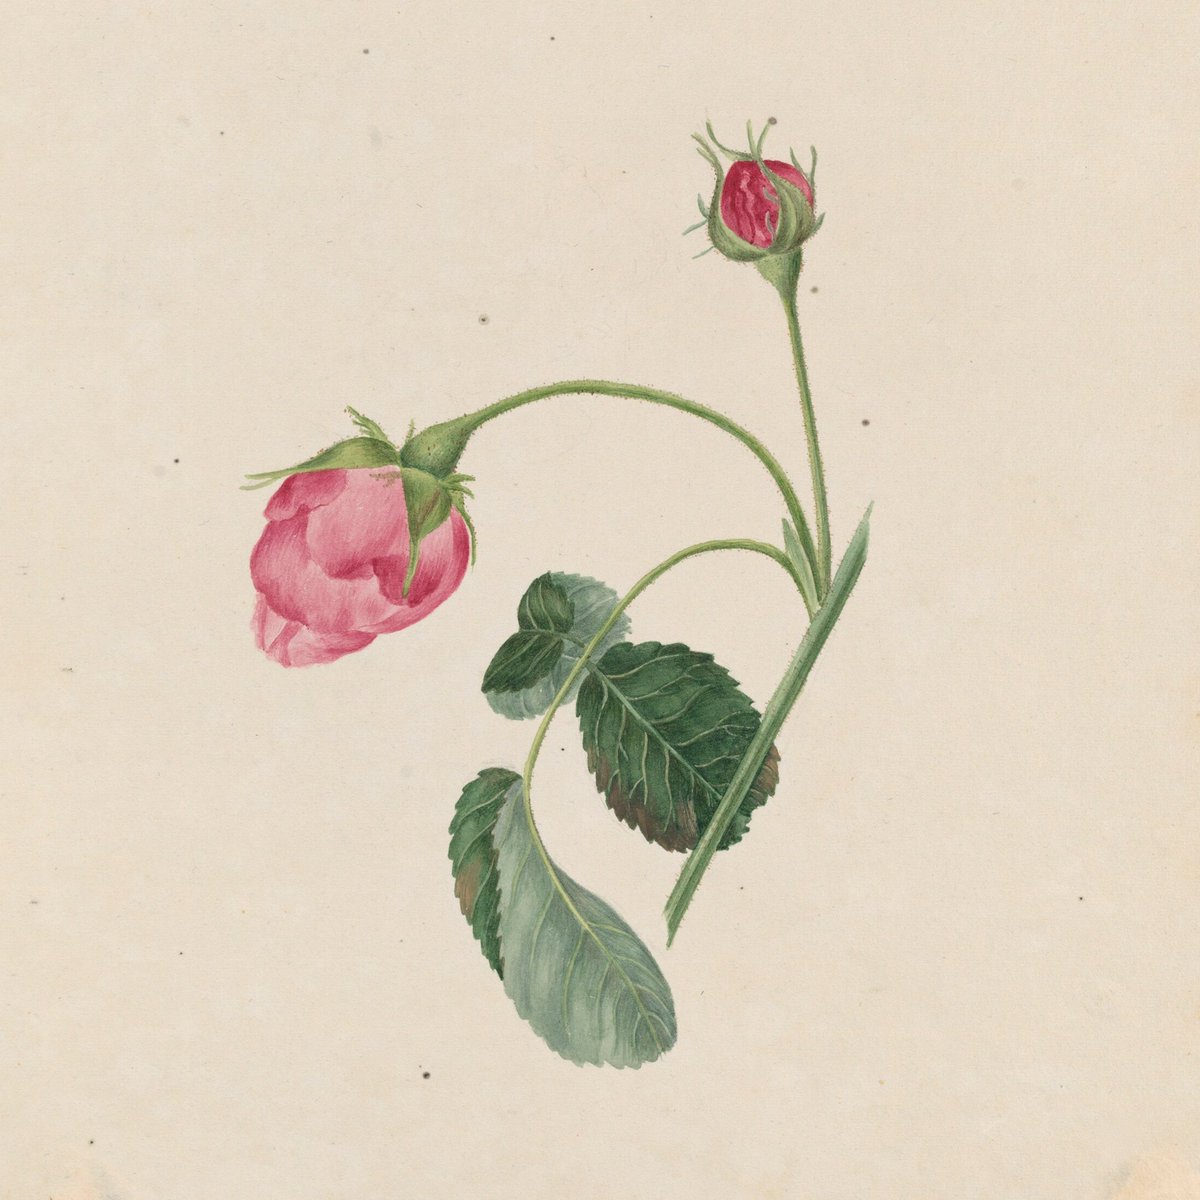 From bearded botanists to beautiful botanical art, drop by the RHS Lindley Library next week for live events, when we’ll be looking at our collection of Victorian photographs and explore how flowers convey emotions🌹 Find out more: eventbrite.co.uk/o/rhs-lindley-…